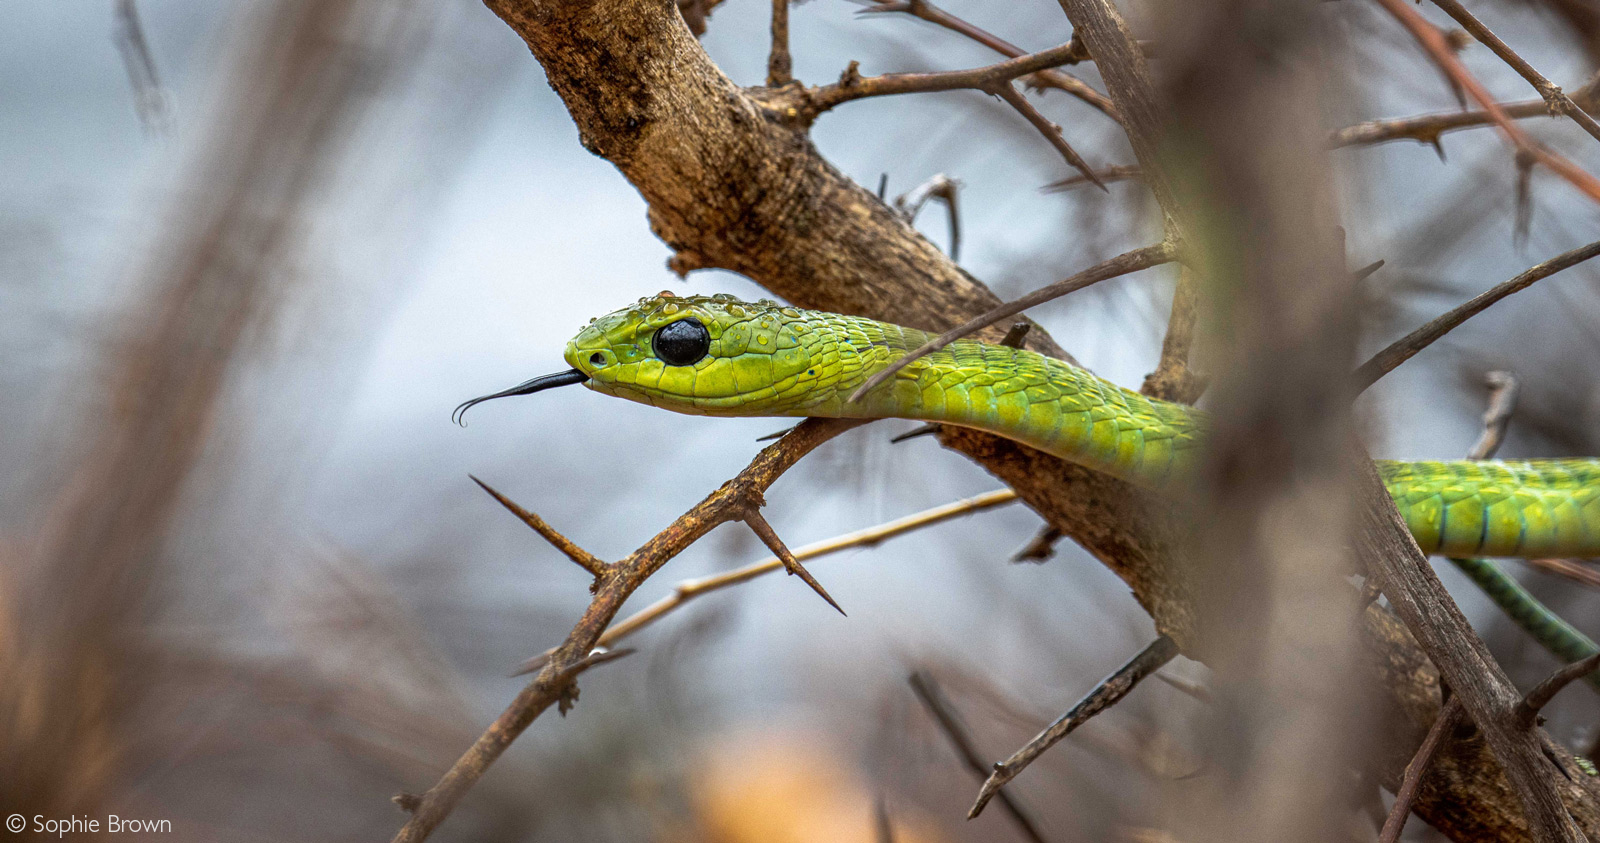 A male boomslang (tree snake) seeks warmth after a strong summer rain shower. Greater Kruger National Park, South Africa © Sophie Brown